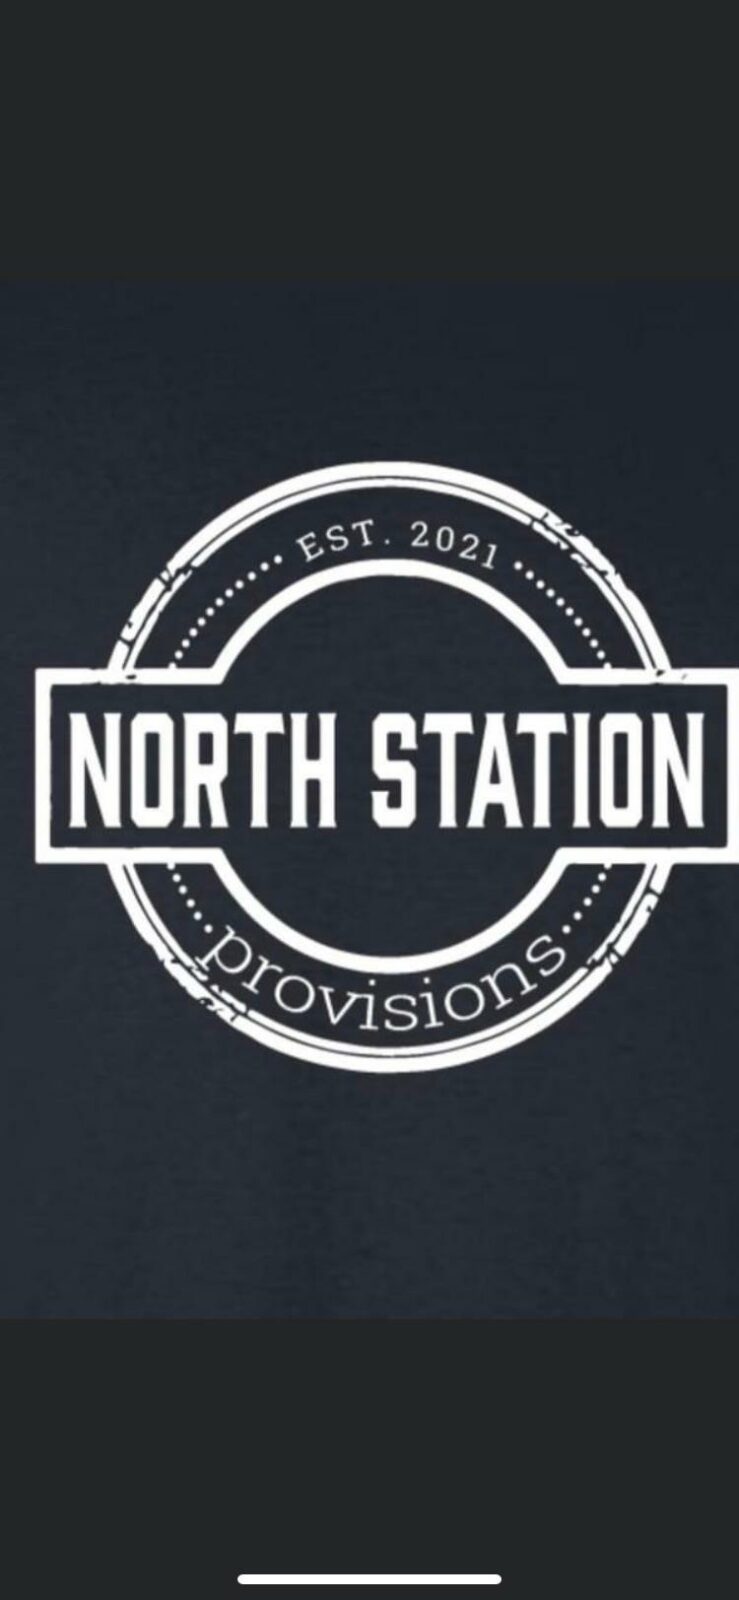 North Station Provisions logo - Business in Manotick